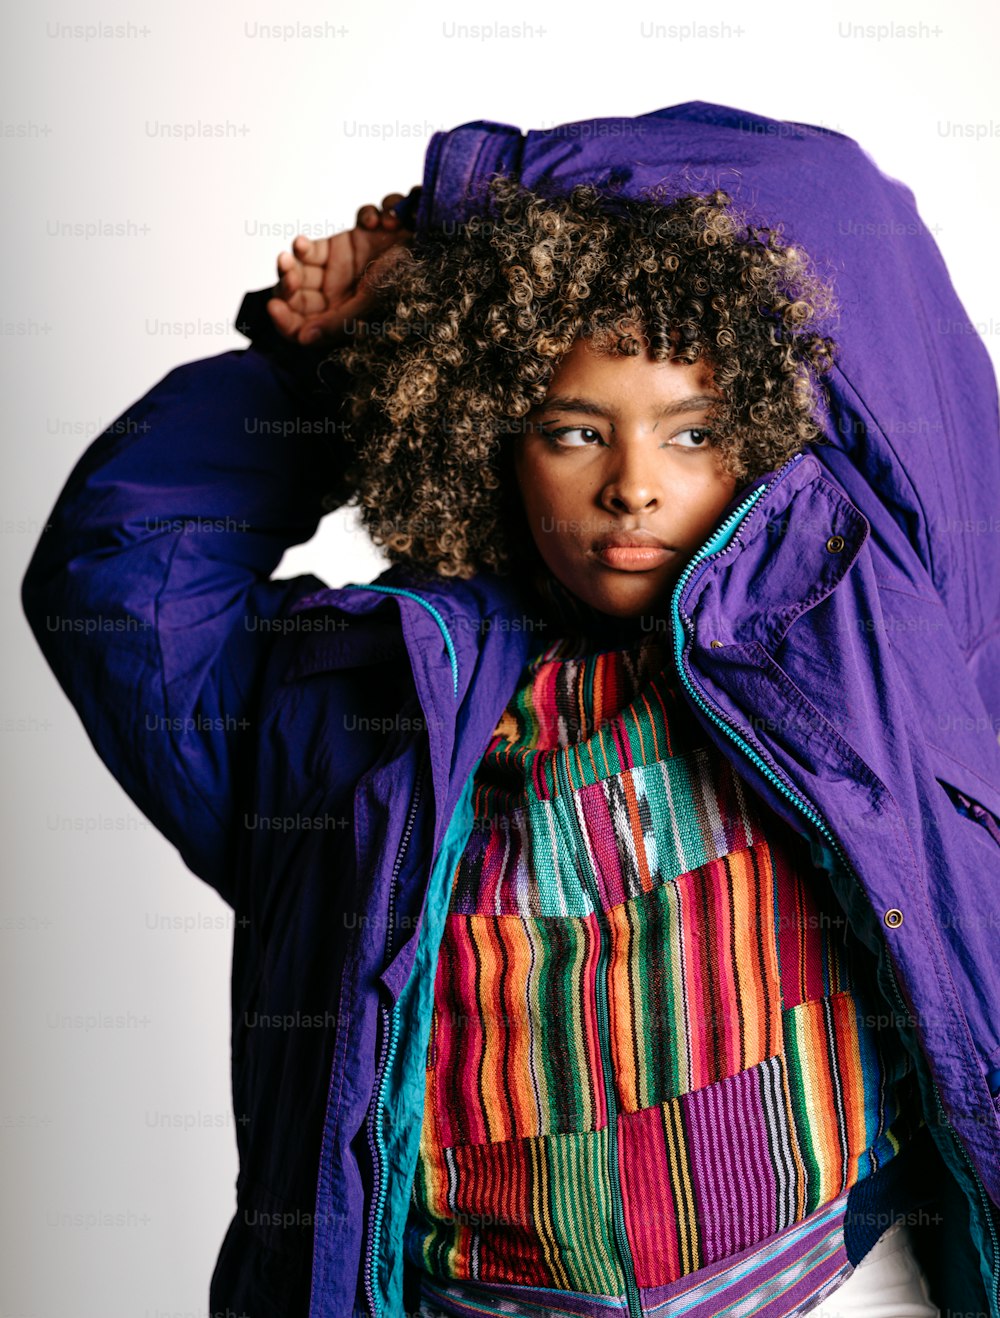 a woman wearing a purple jacket and a colorful shirt